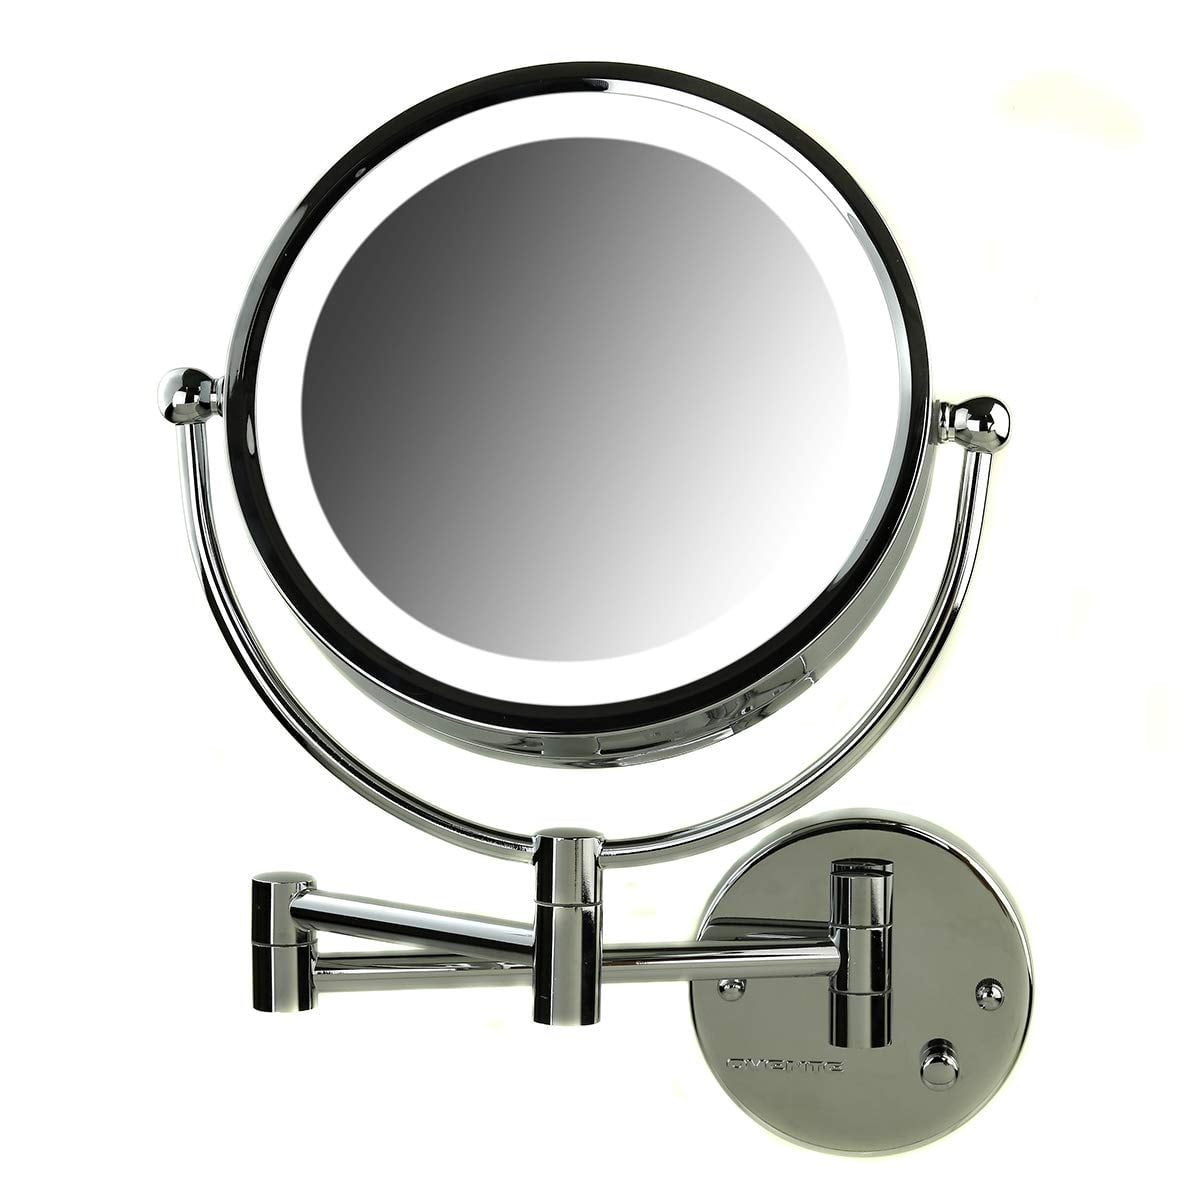 Ovente Lighted Wall Mounted Makeup, Cosmetic Magnifying Mirrors Wall Mounted